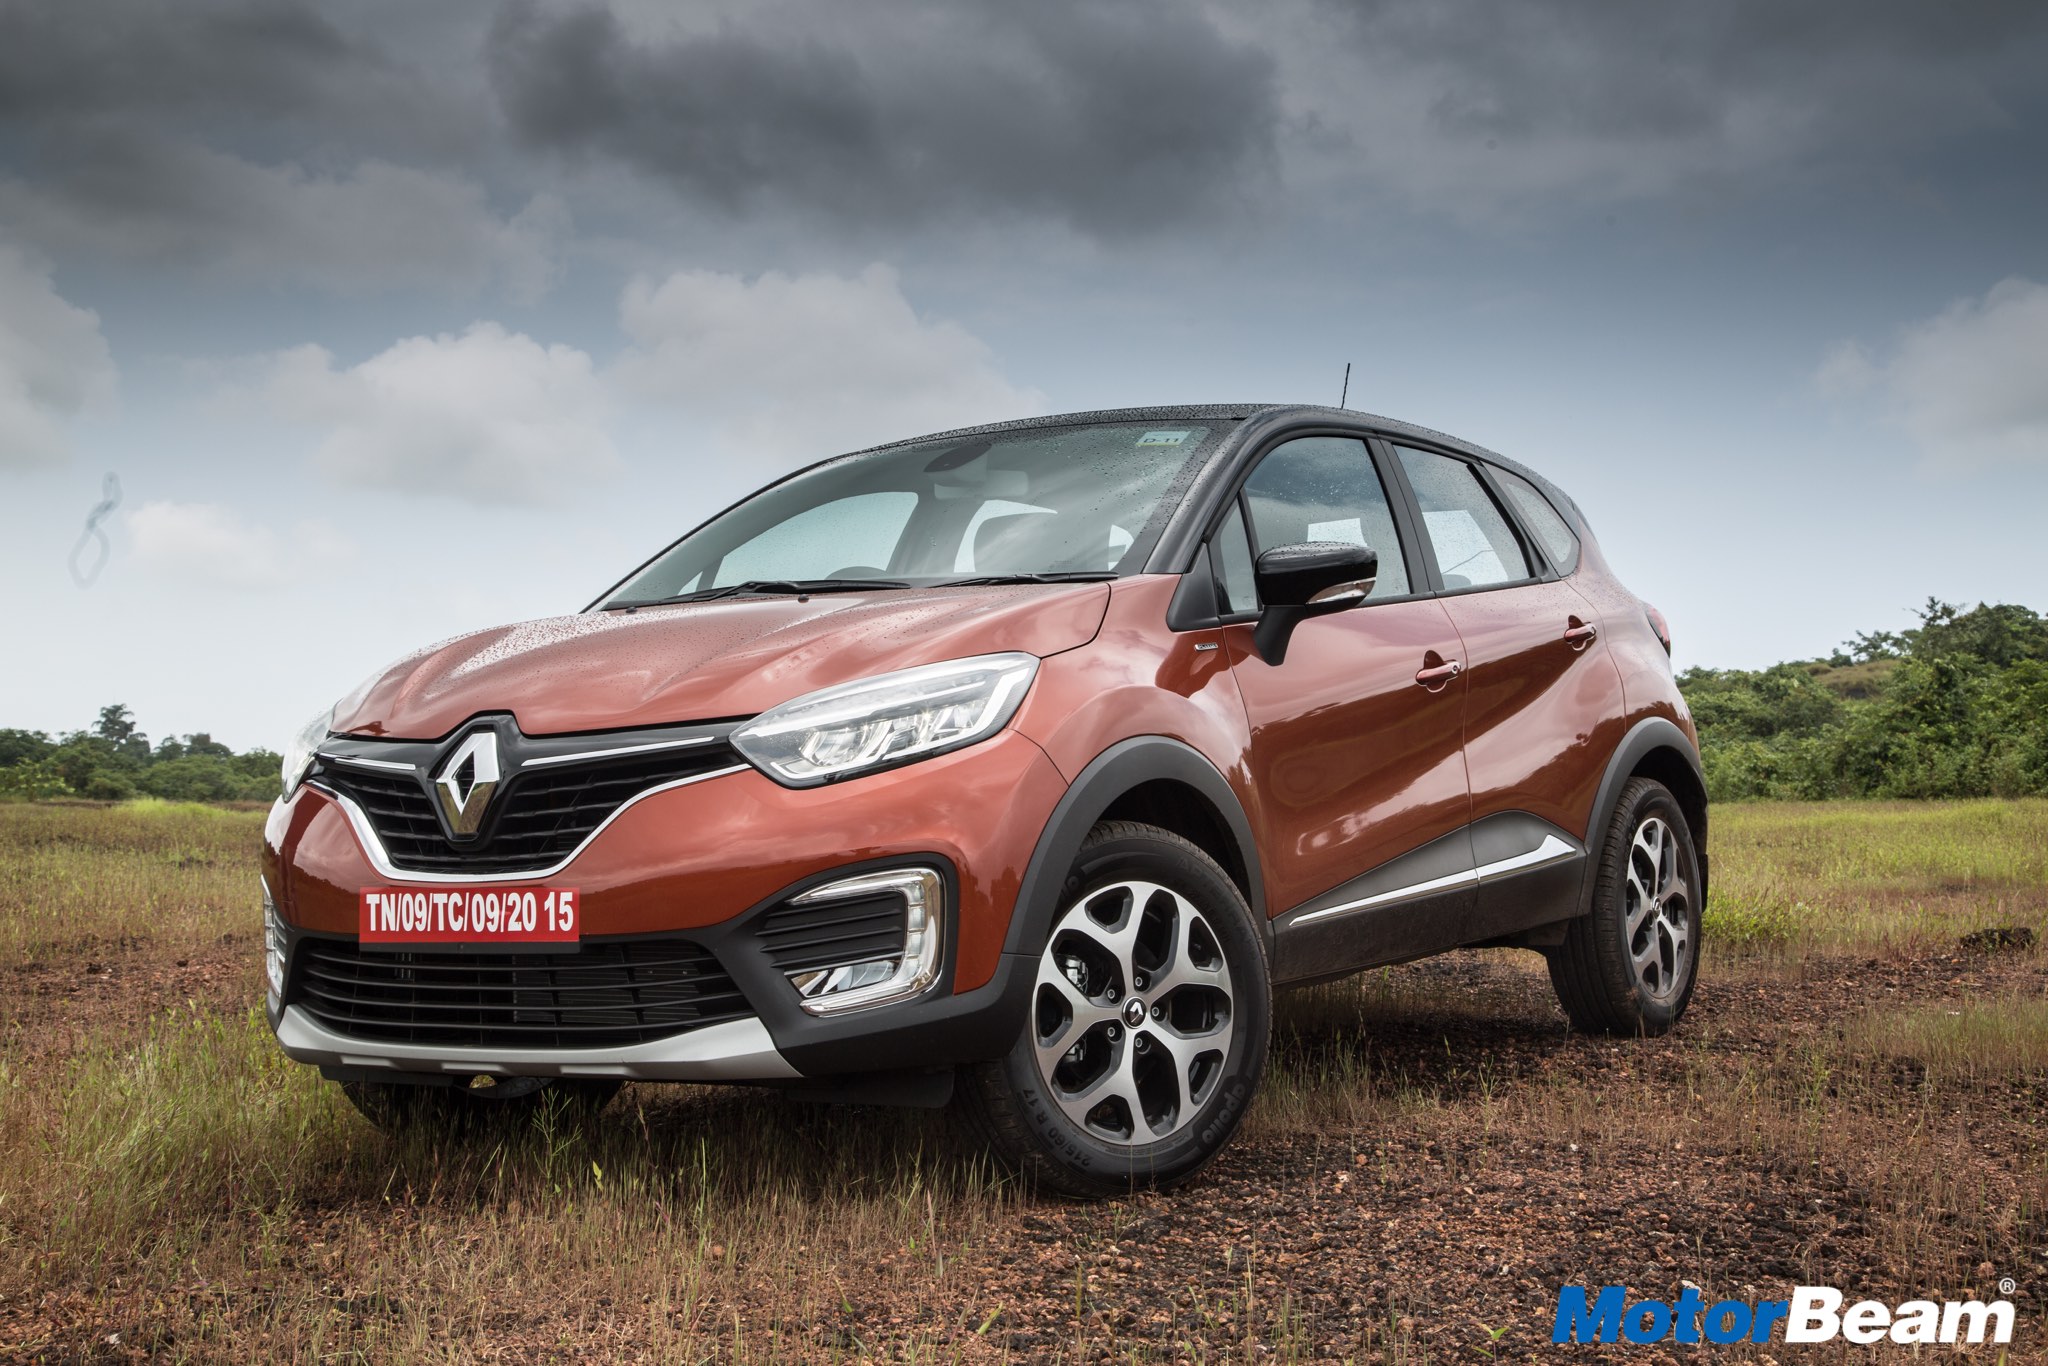 Renault Captur Engines, Driving and Performance